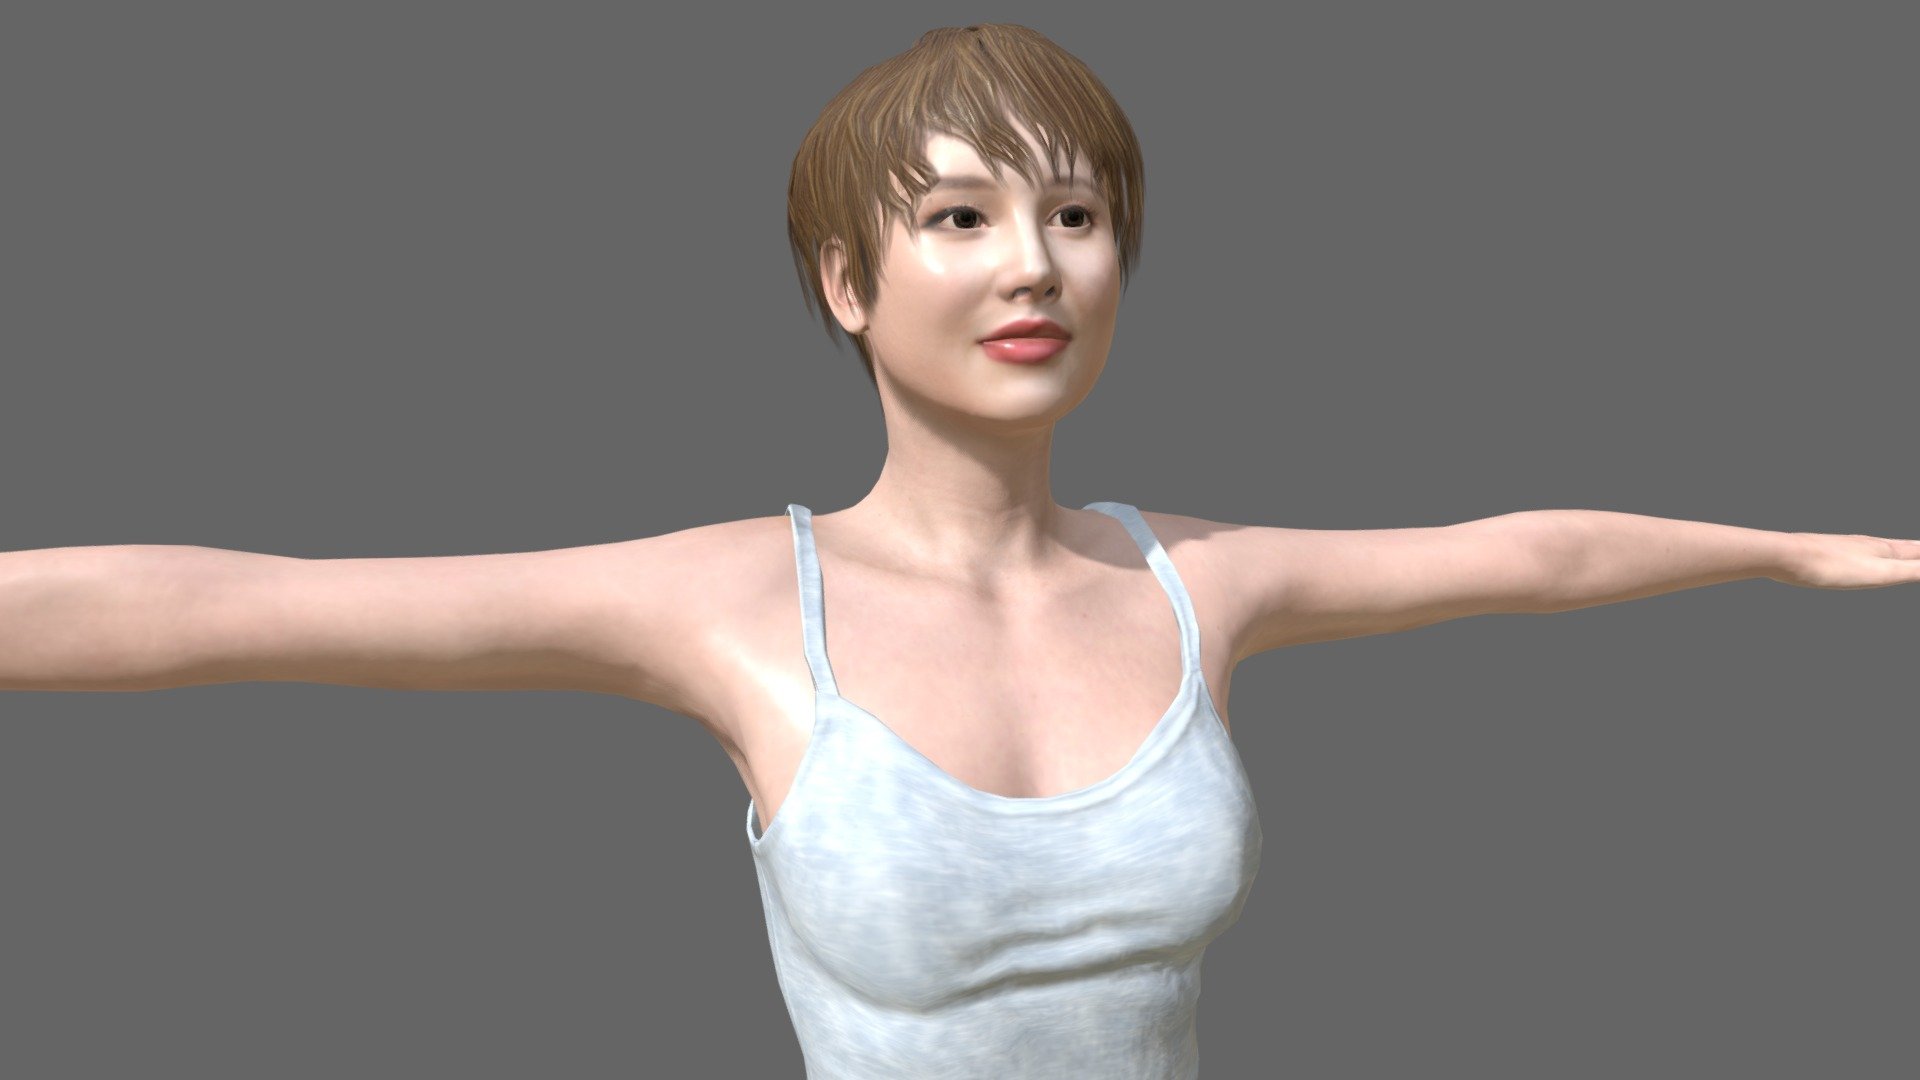 Asian Girl - 3D Model designed by character creator pro - Asian Girl - 3D model by RiverofCreative 3d model